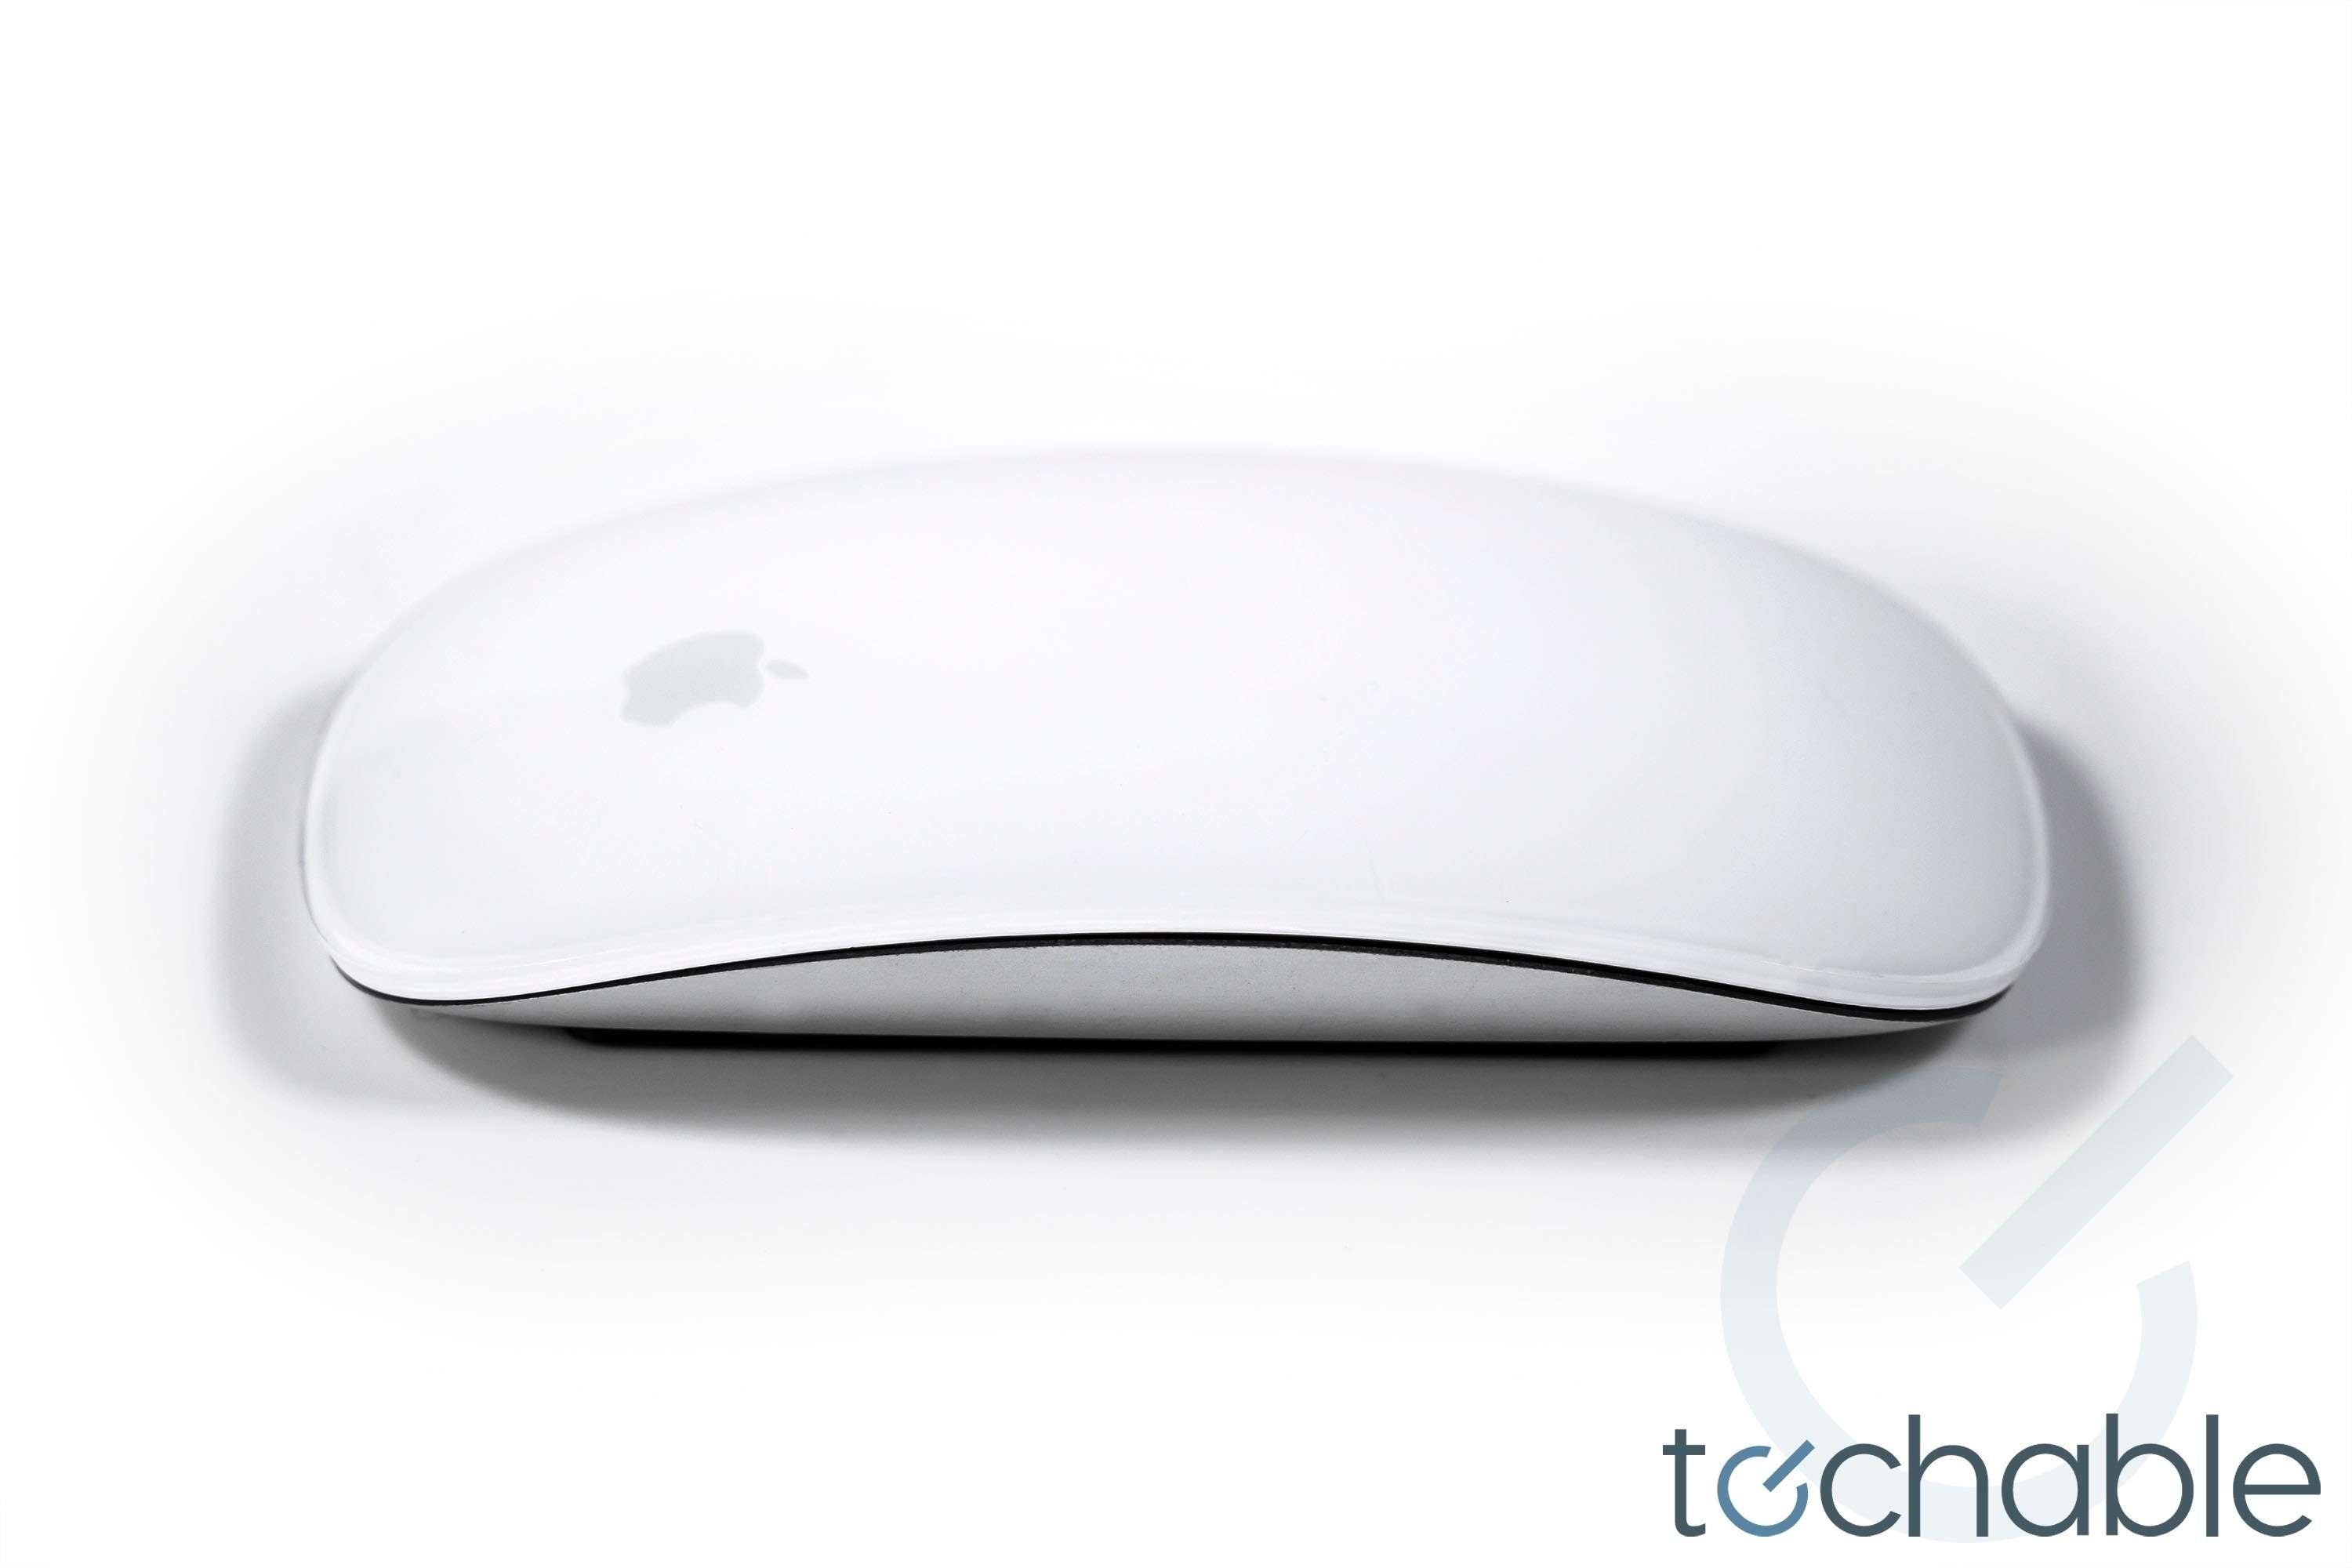 Magic Mouse 2: How Good is This Mouse?